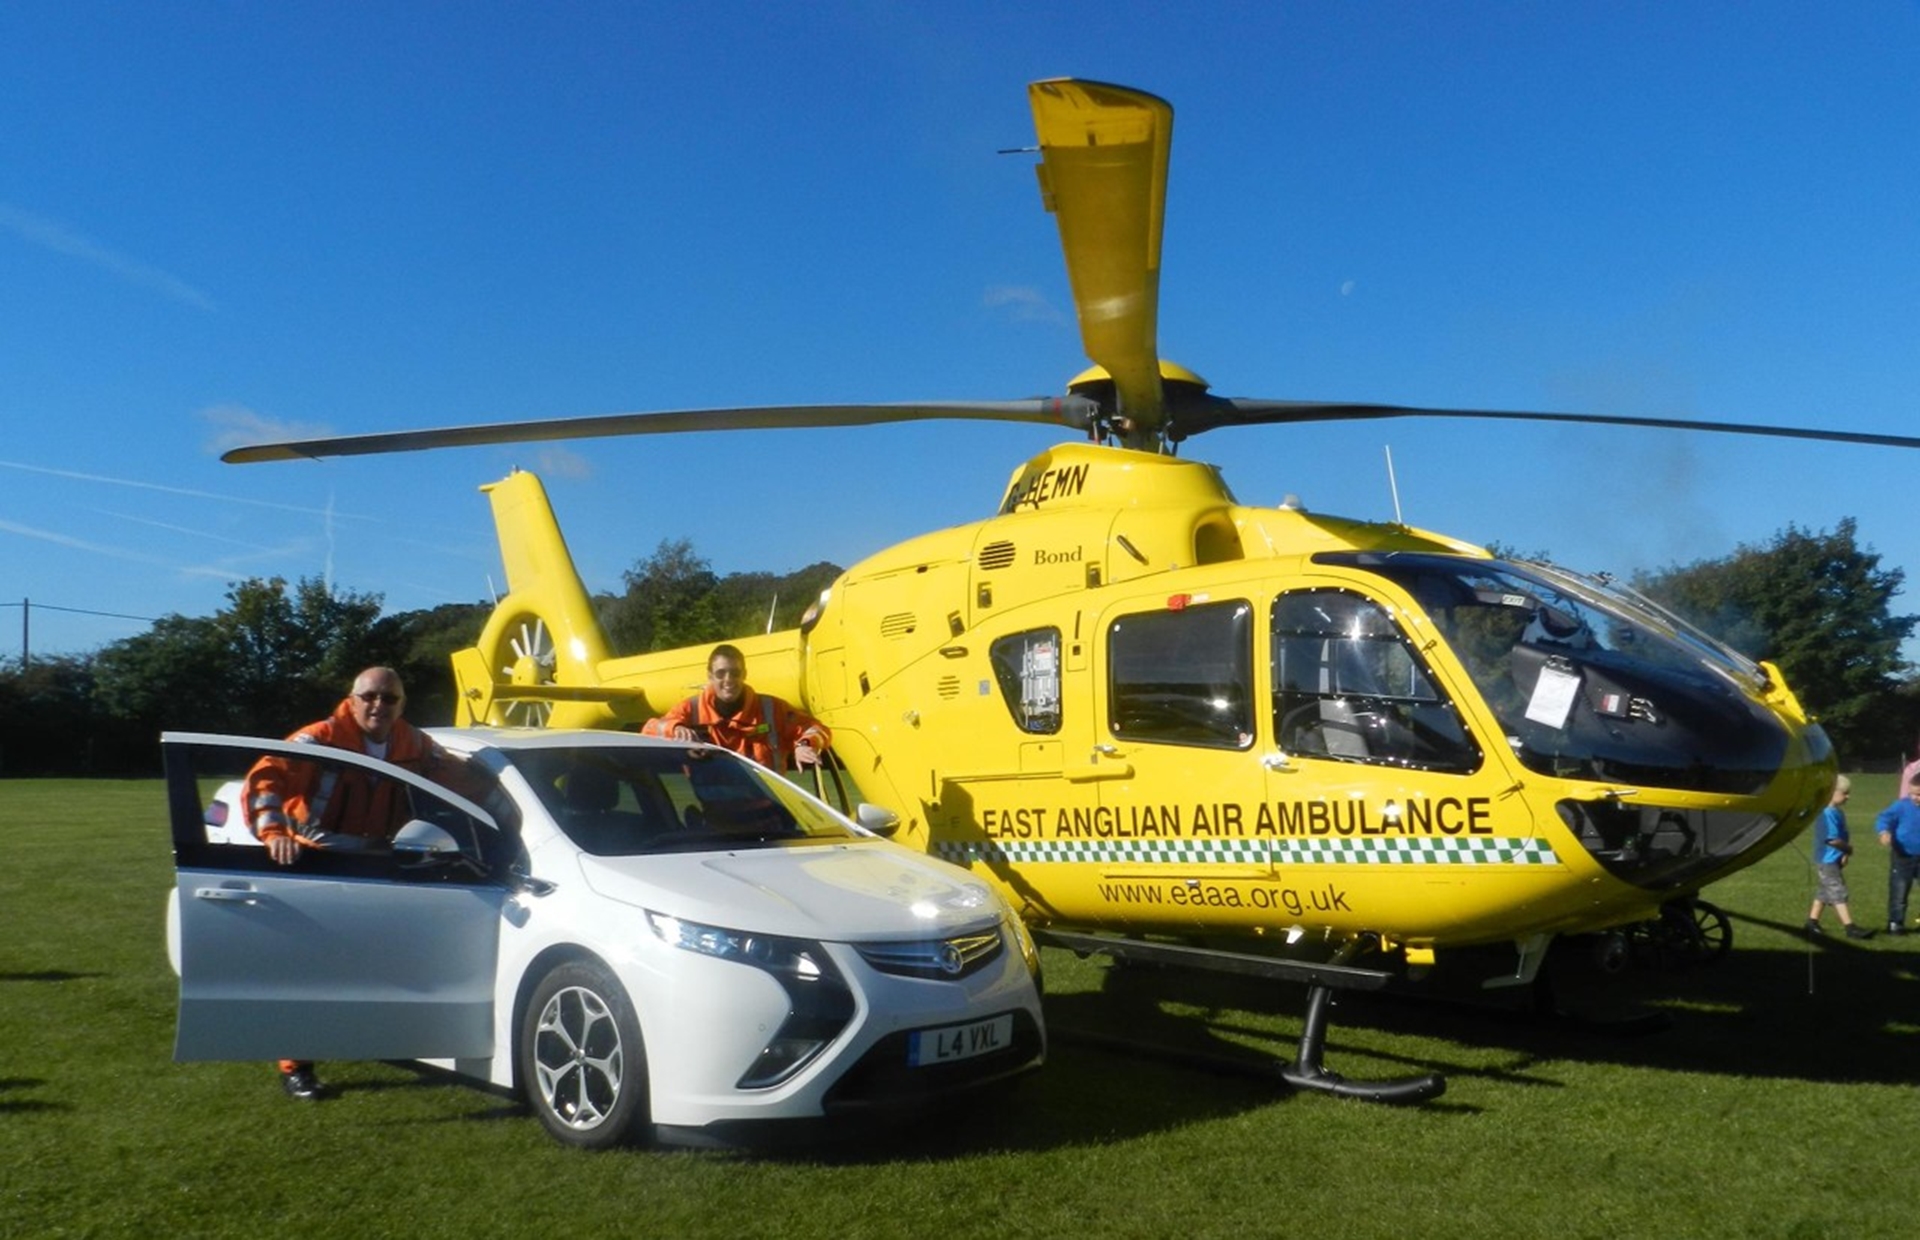 TWO HIGH FLYERS FUND RAISE FOR EAST ANGLIAN AIR AMBULANCE